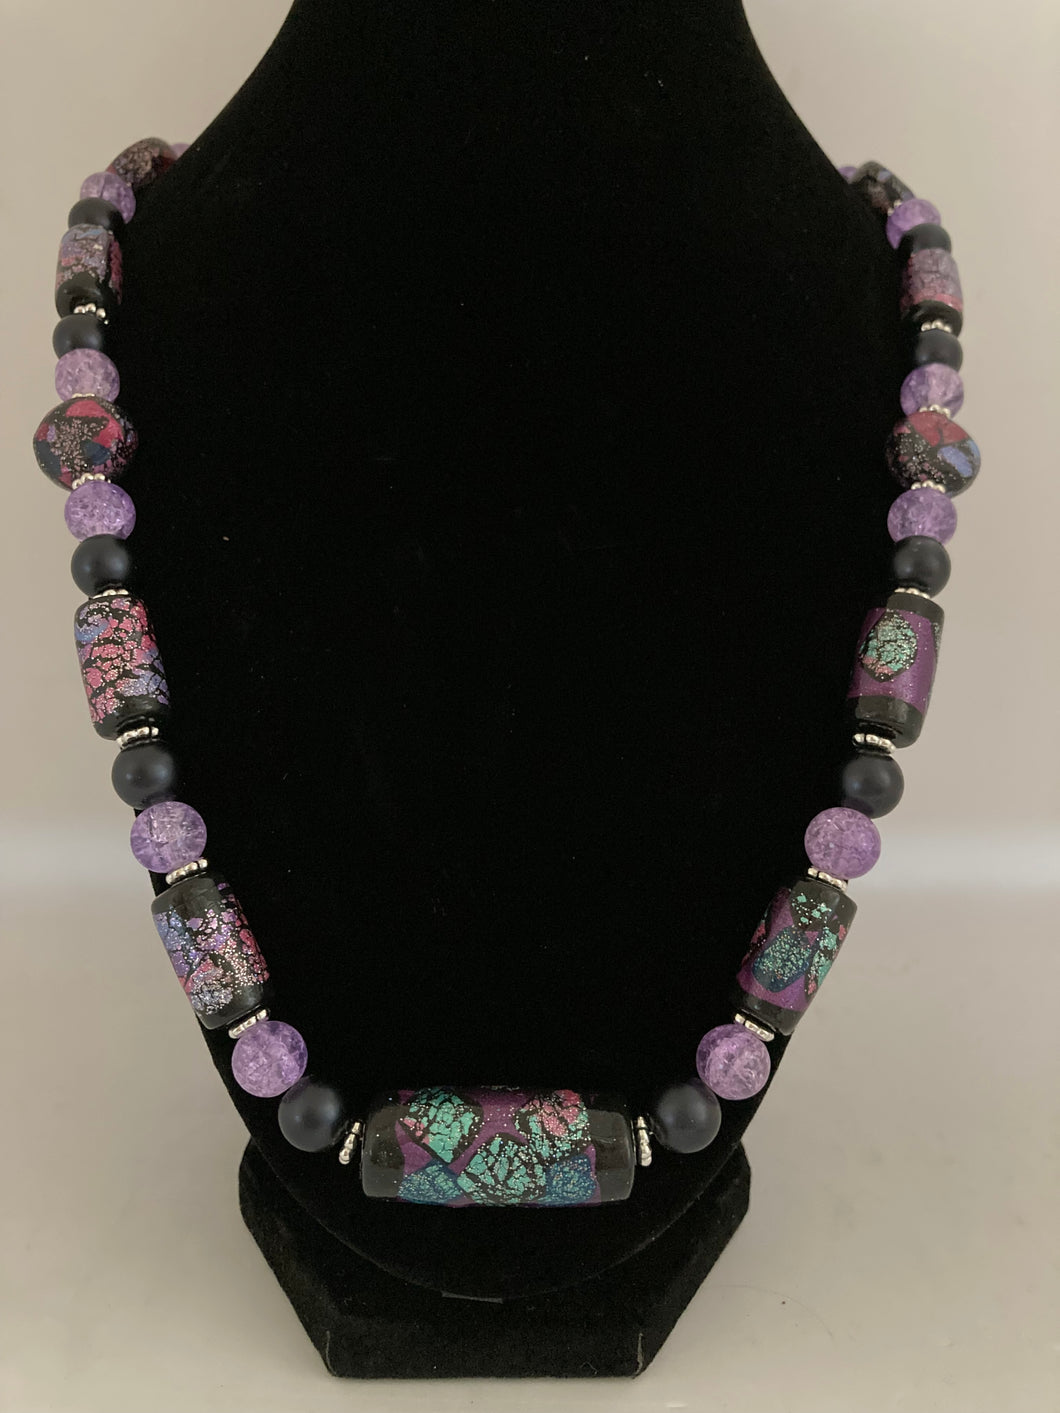 Sparkly floral barrel beads necklace and matching earrings set